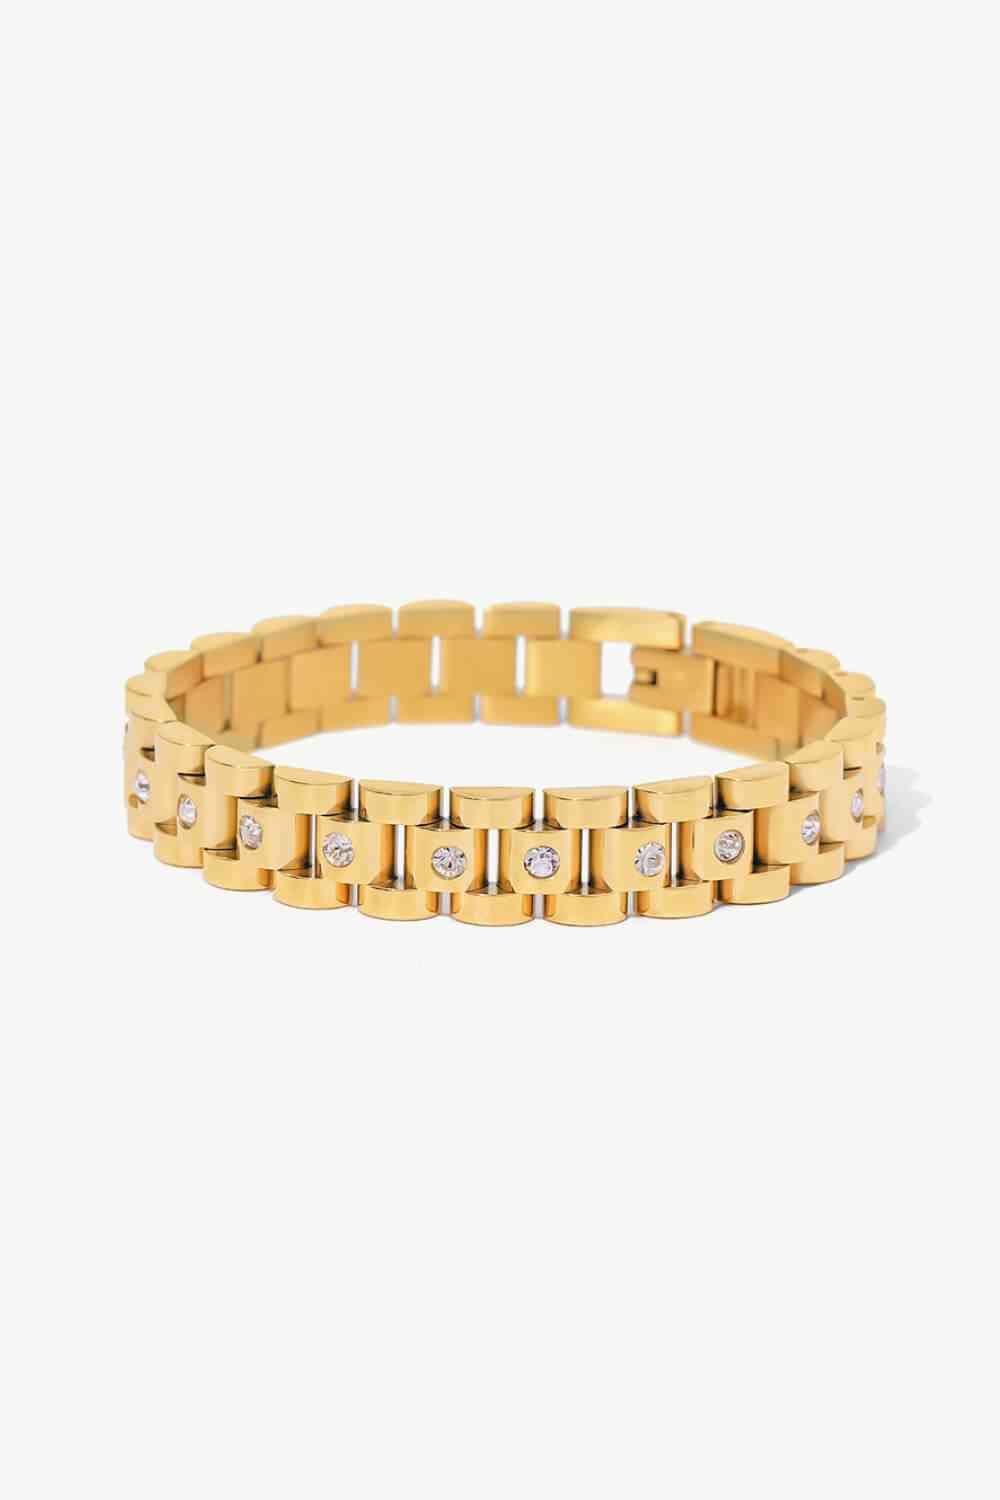 18K Gold-Plated Watch Band Bracelet - Bracelet - Wild Willows Boutique - Massapequa, NY, affordable and fashionable clothing for women of all ages. Bottoms, tops, dresses, intimates, outerwear, sweater, shoes, accessories, jewelry, active wear, and more // Wild Willow Boutique.